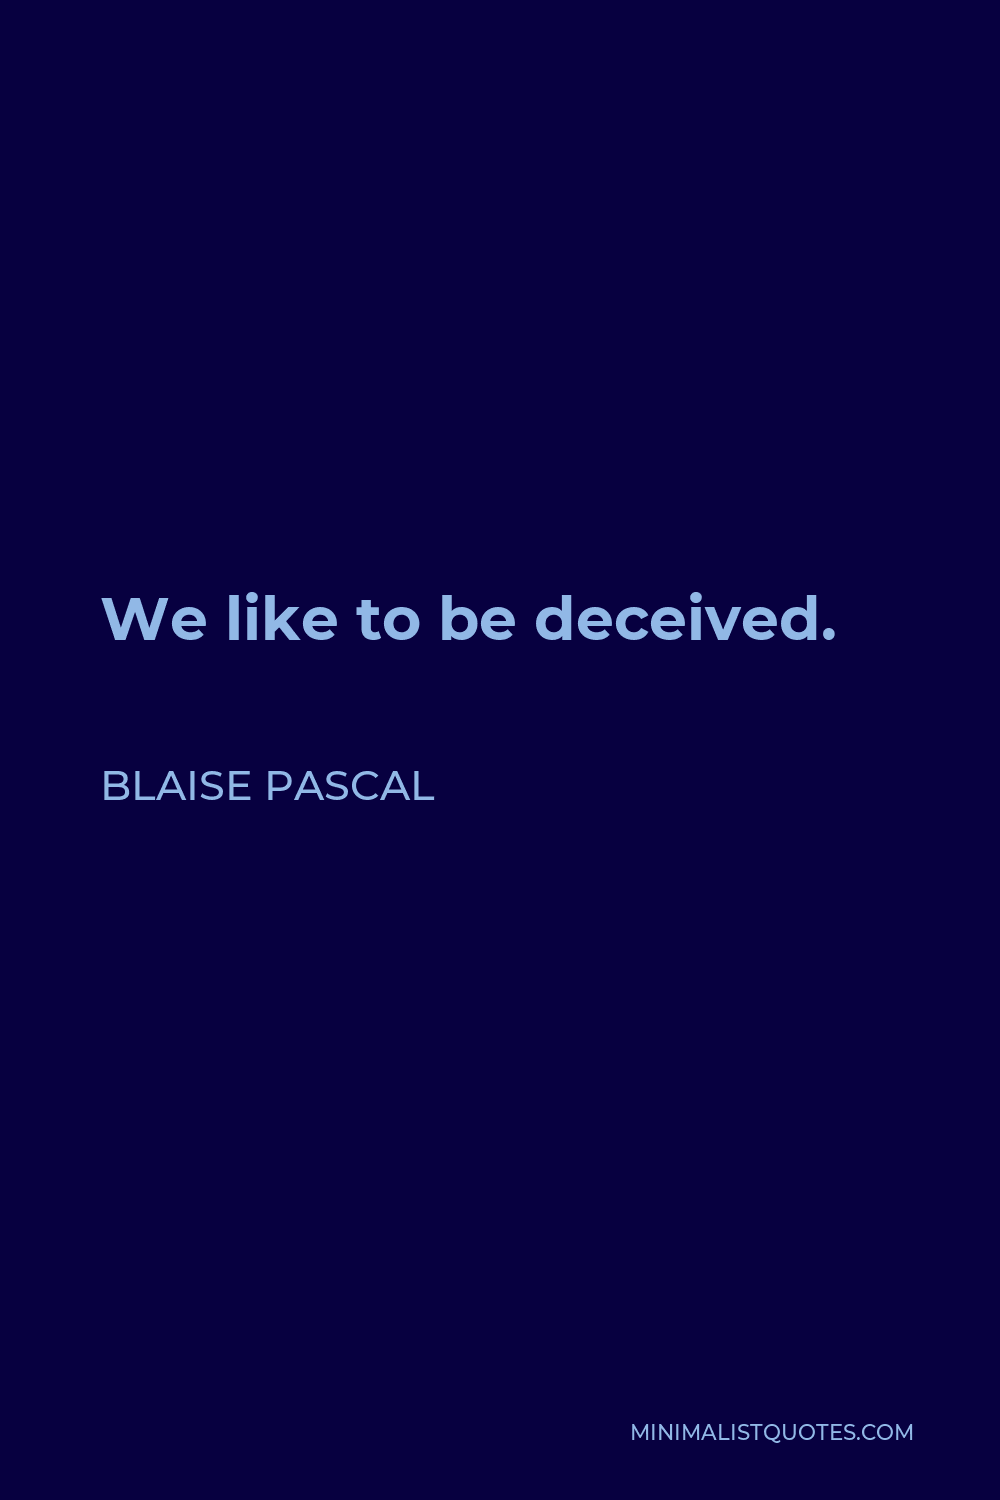 Blaise Pascal Quote - We like to be deceived.